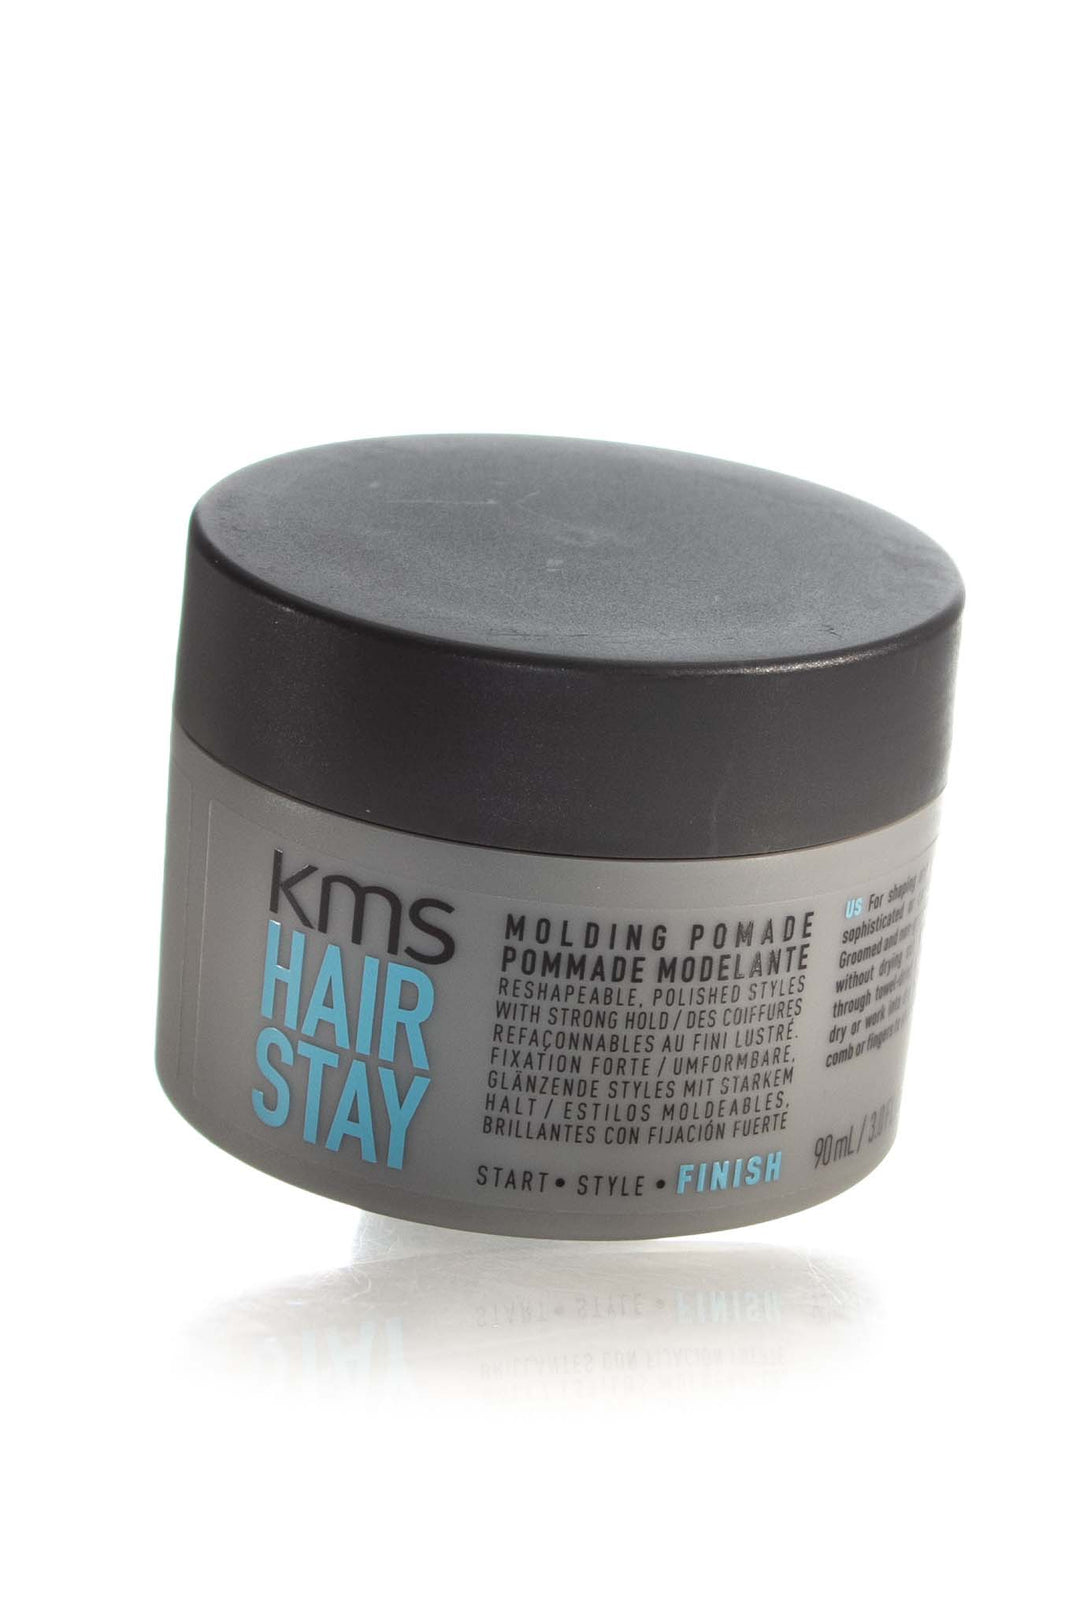 kms-hair-stay-molding-pomade-90ml